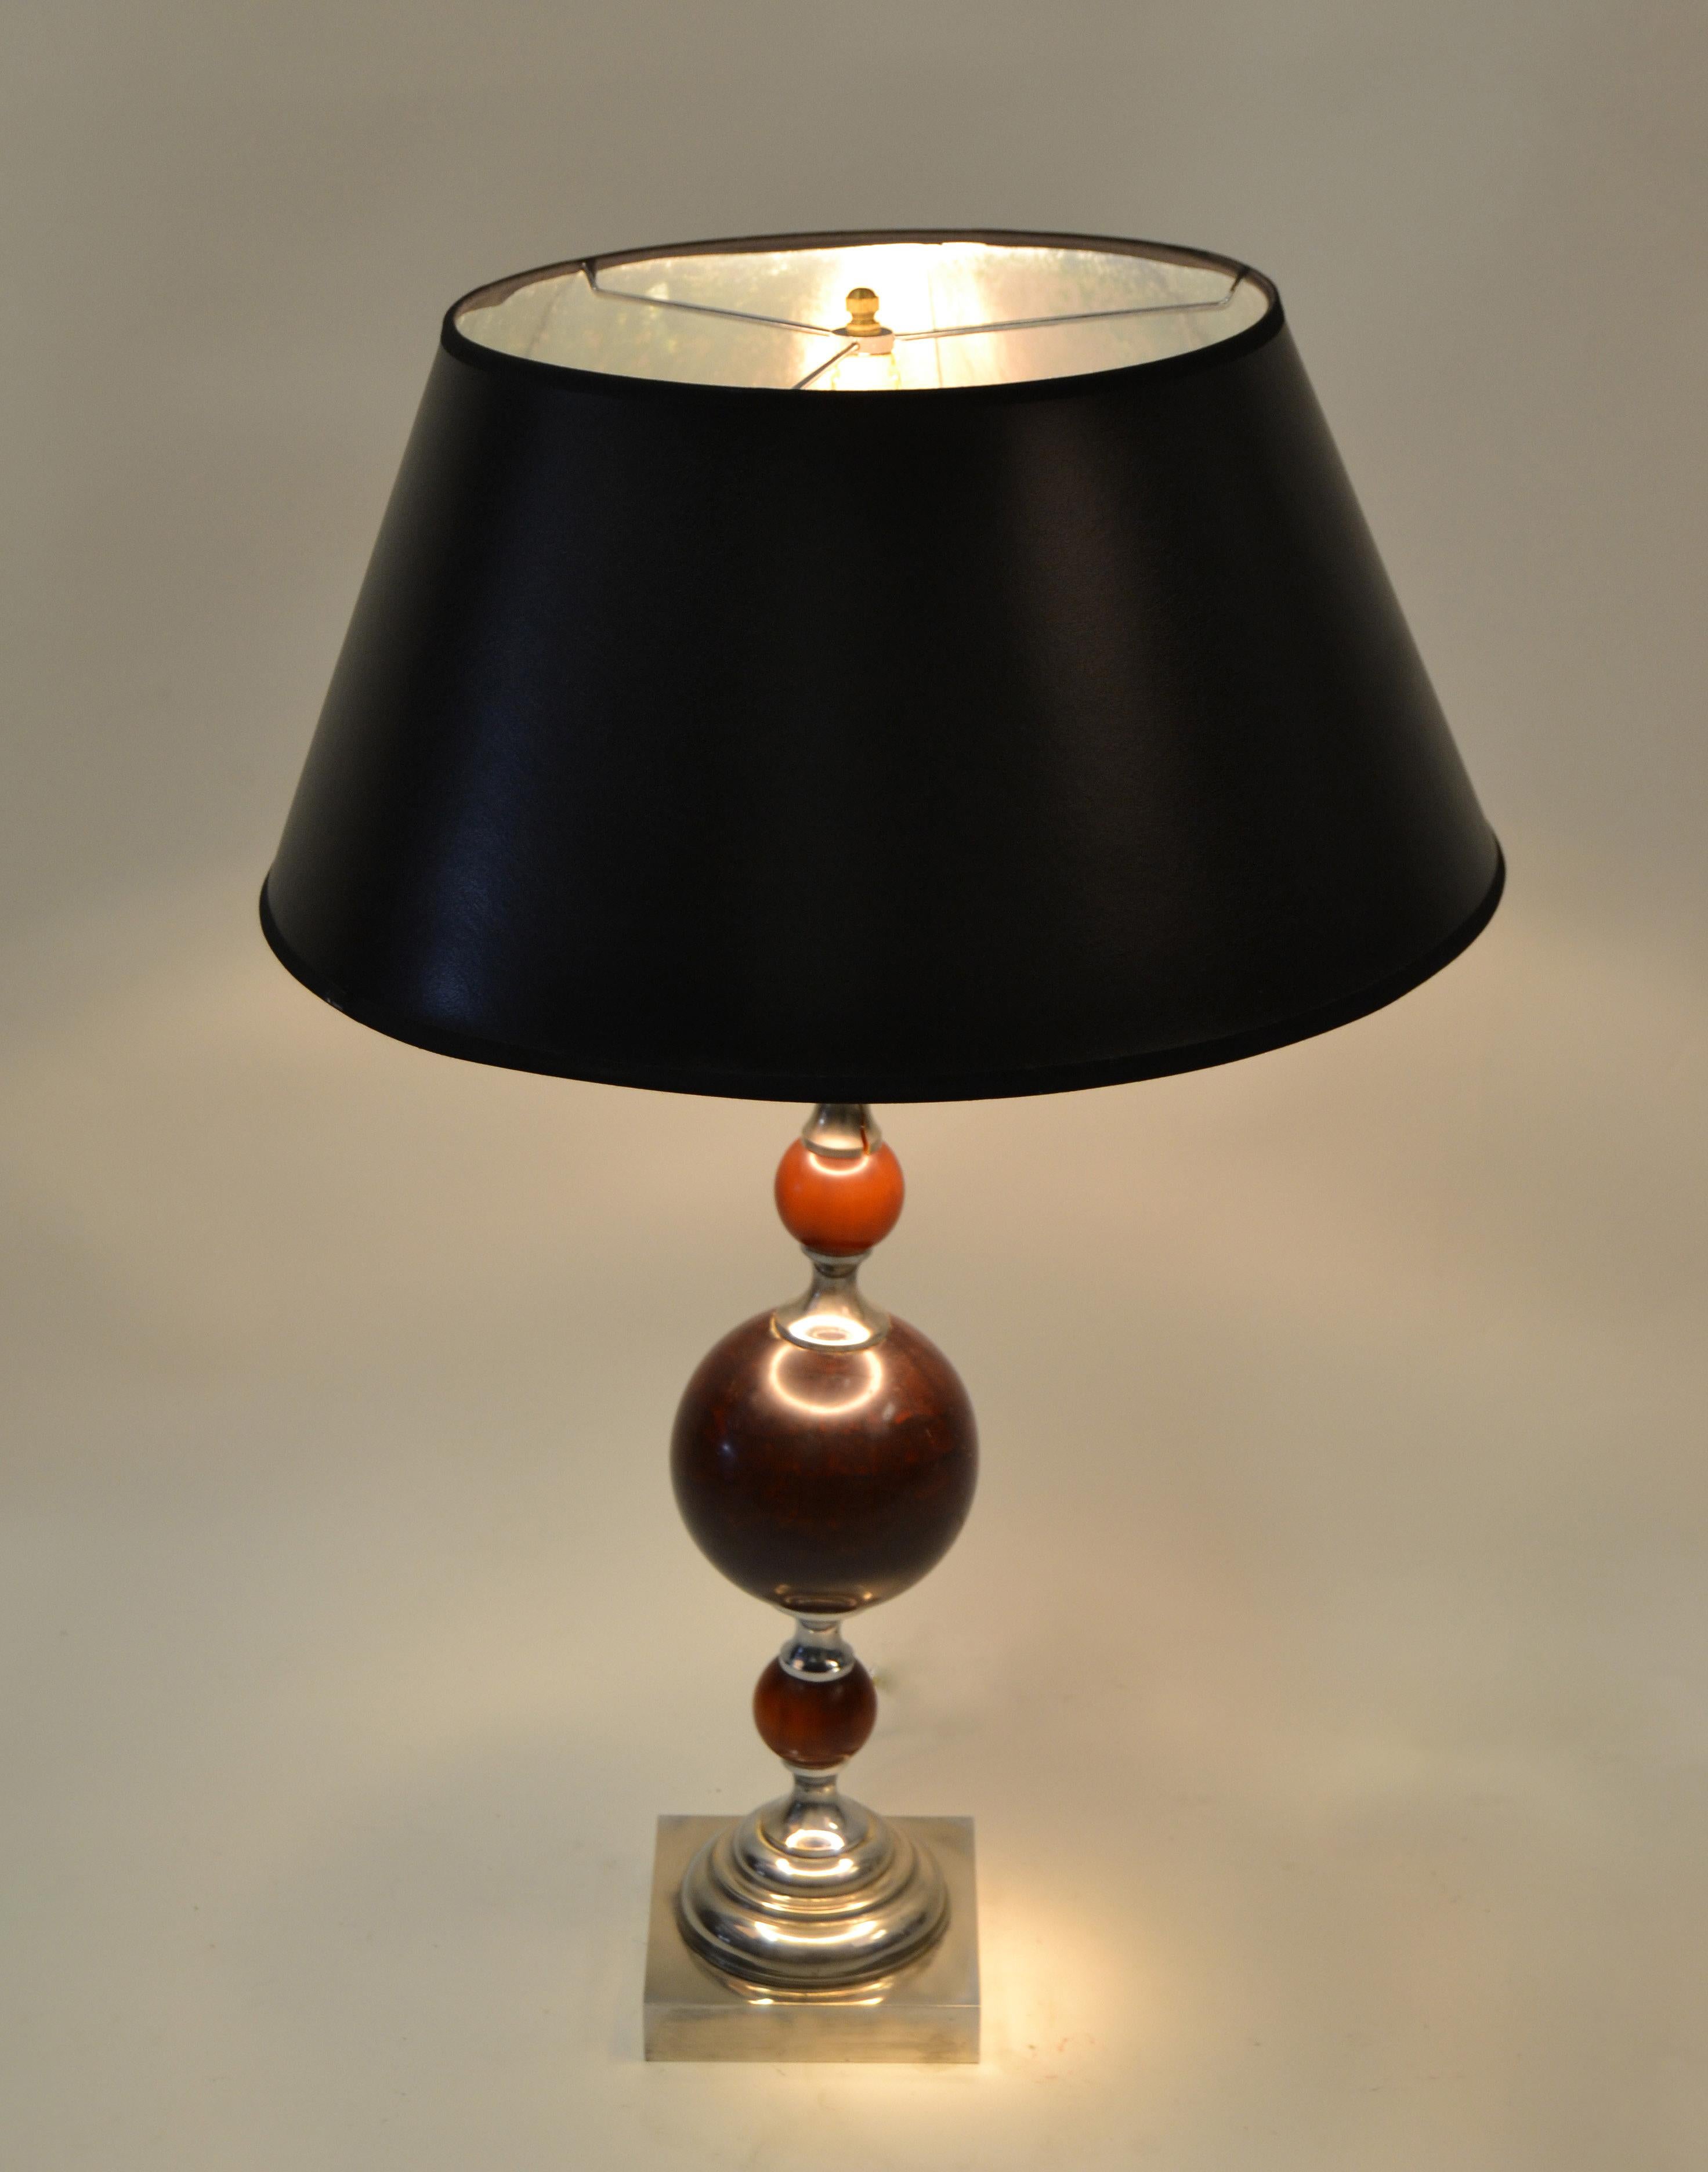 Art Deco Maison Charles style French 3 Burgundy Spheres Nickel-Plated Table Lamp In Good Condition For Sale In Miami, FL